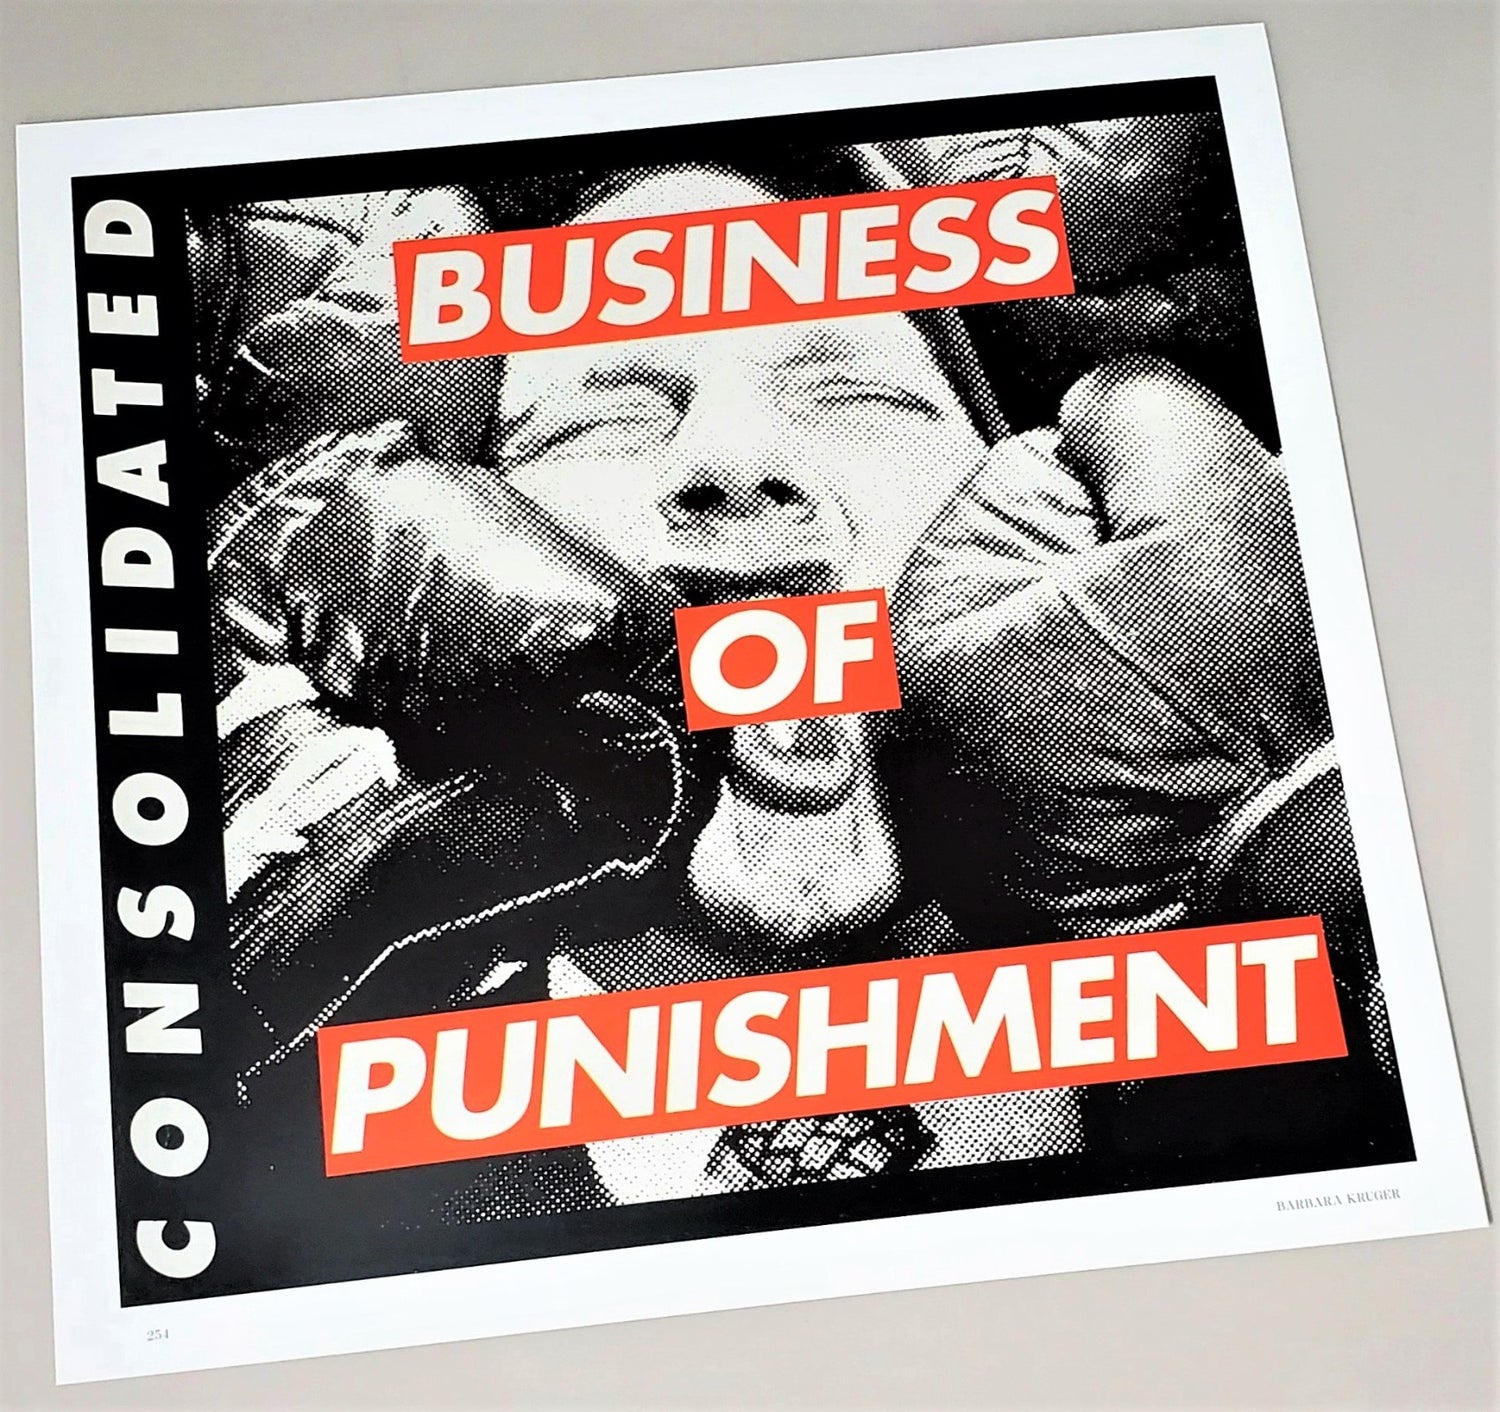 Consolidated Business Of Punishment